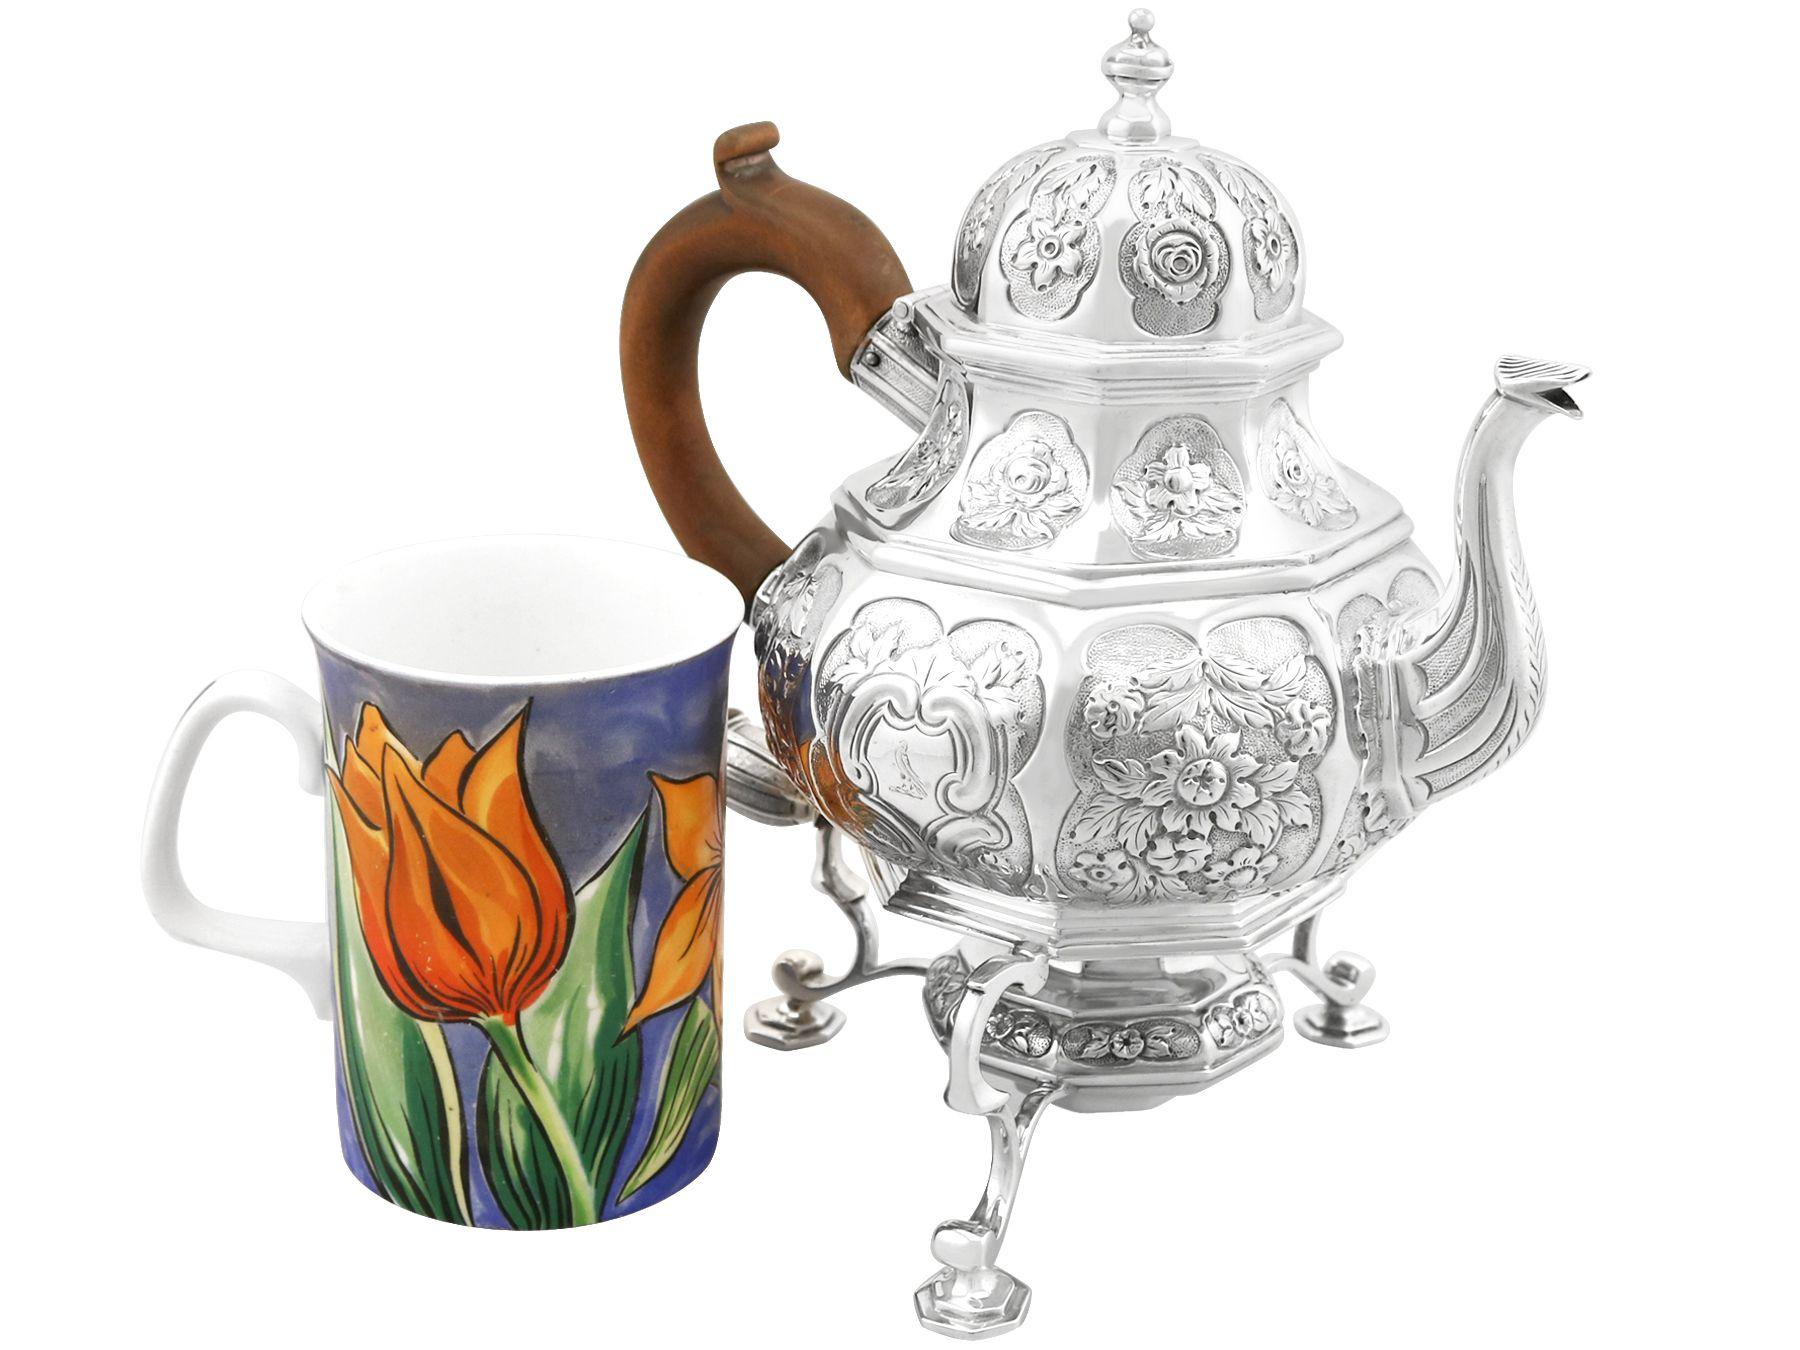 An exceptional, fine and impressive antique George III English sterling silver teapot with spirit burner made by John Cope Folkard; an addition to our Georgian silver teaware collection.

This exceptional antique George III English sterling silver